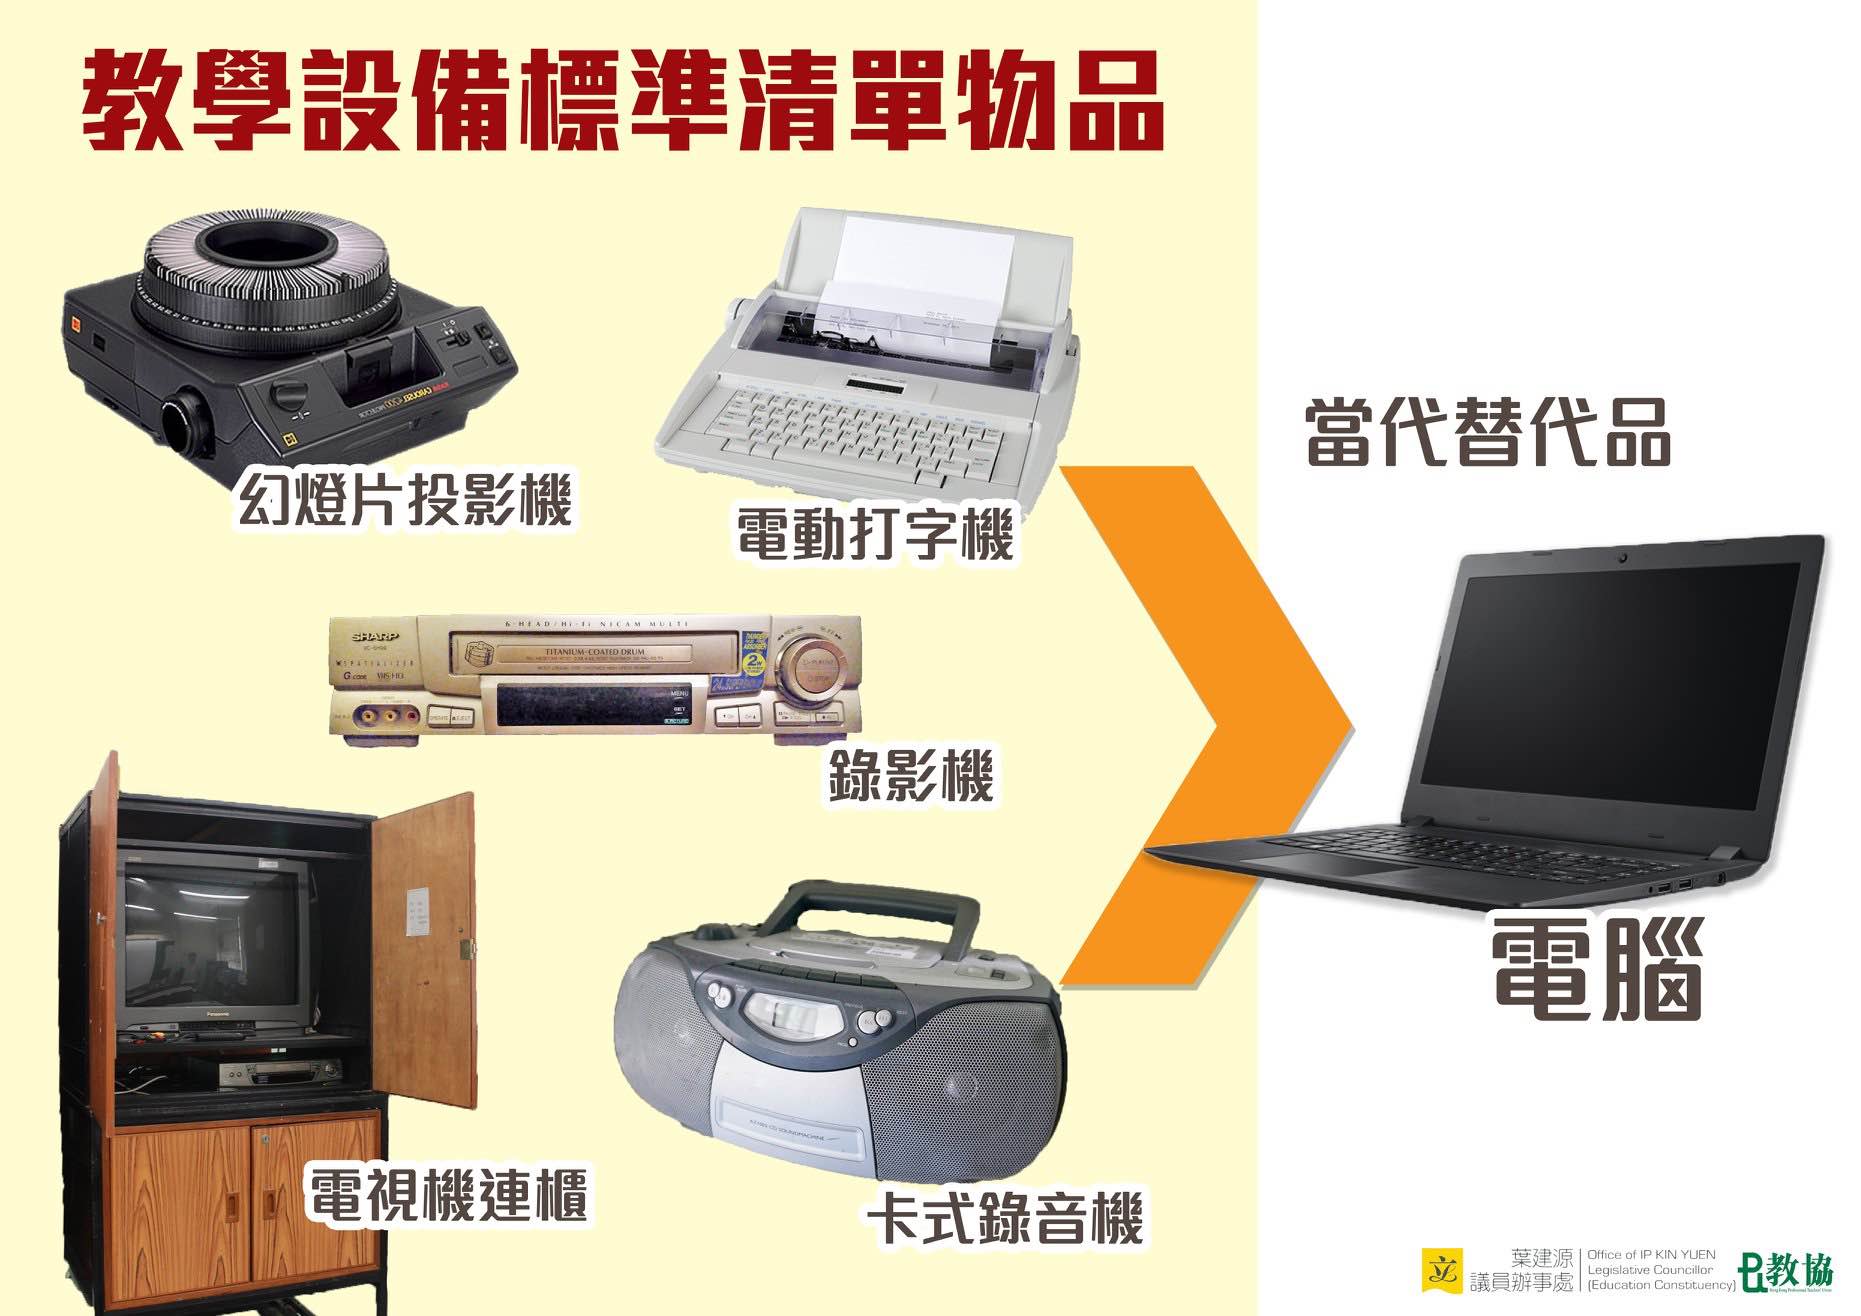 A graphic to give a sense of some of the old kit prescribed for new schools by the Education Bureau uploaded to Facebook by education sector lawmaker Ip Kin-yuen